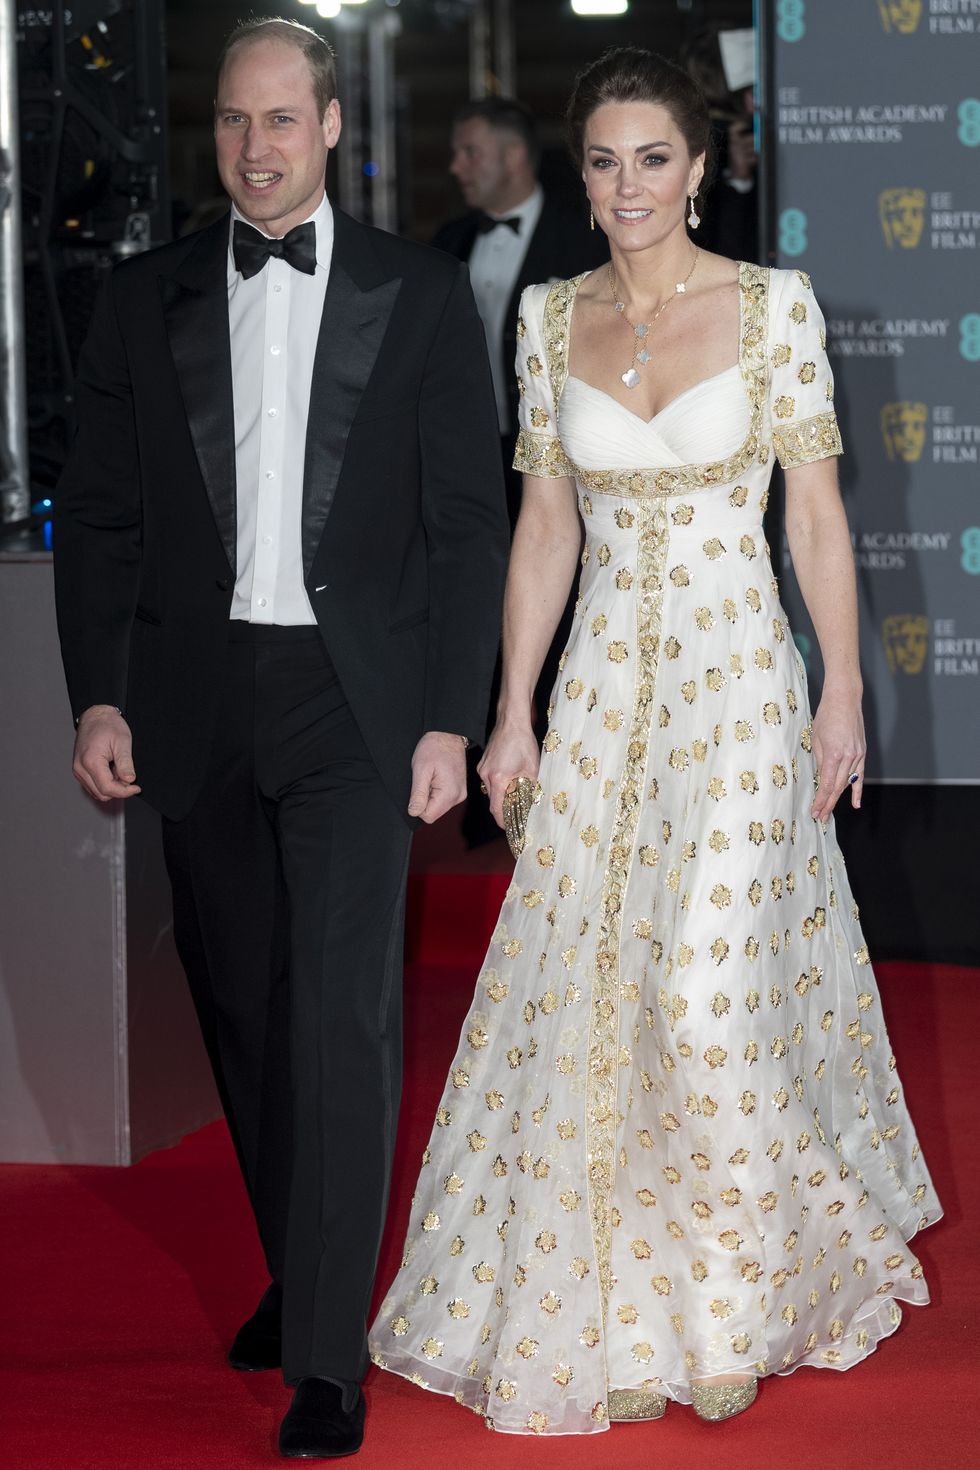 the duke and duchess of cambridge attend the ee british academy film awards